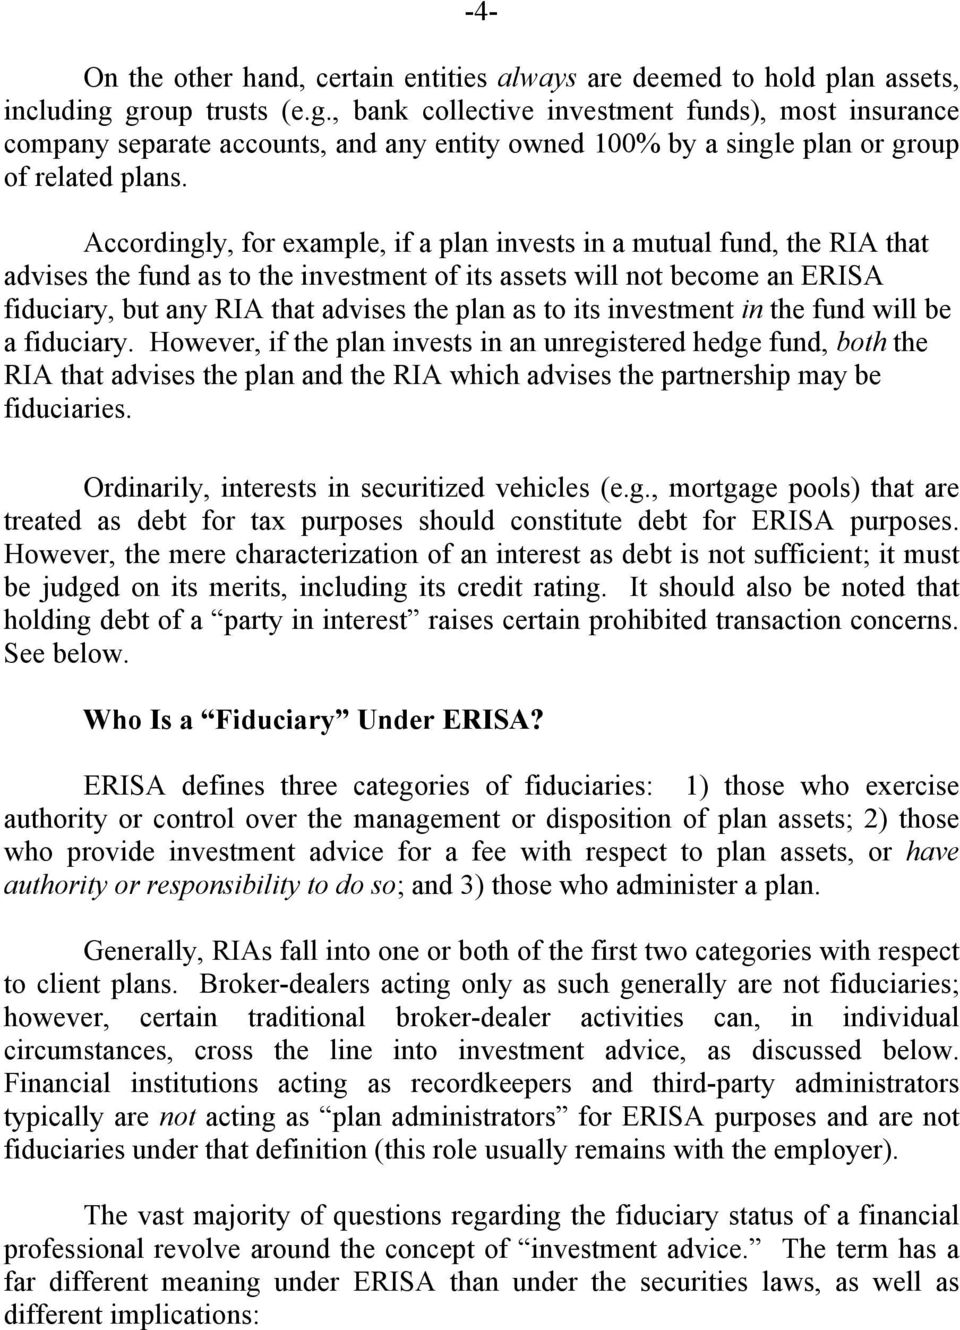 Accordingly, for example, if a plan invests in a mutual fund, the RIA that advises the fund as to the investment of its assets will not become an ERISA fiduciary, but any RIA that advises the plan as